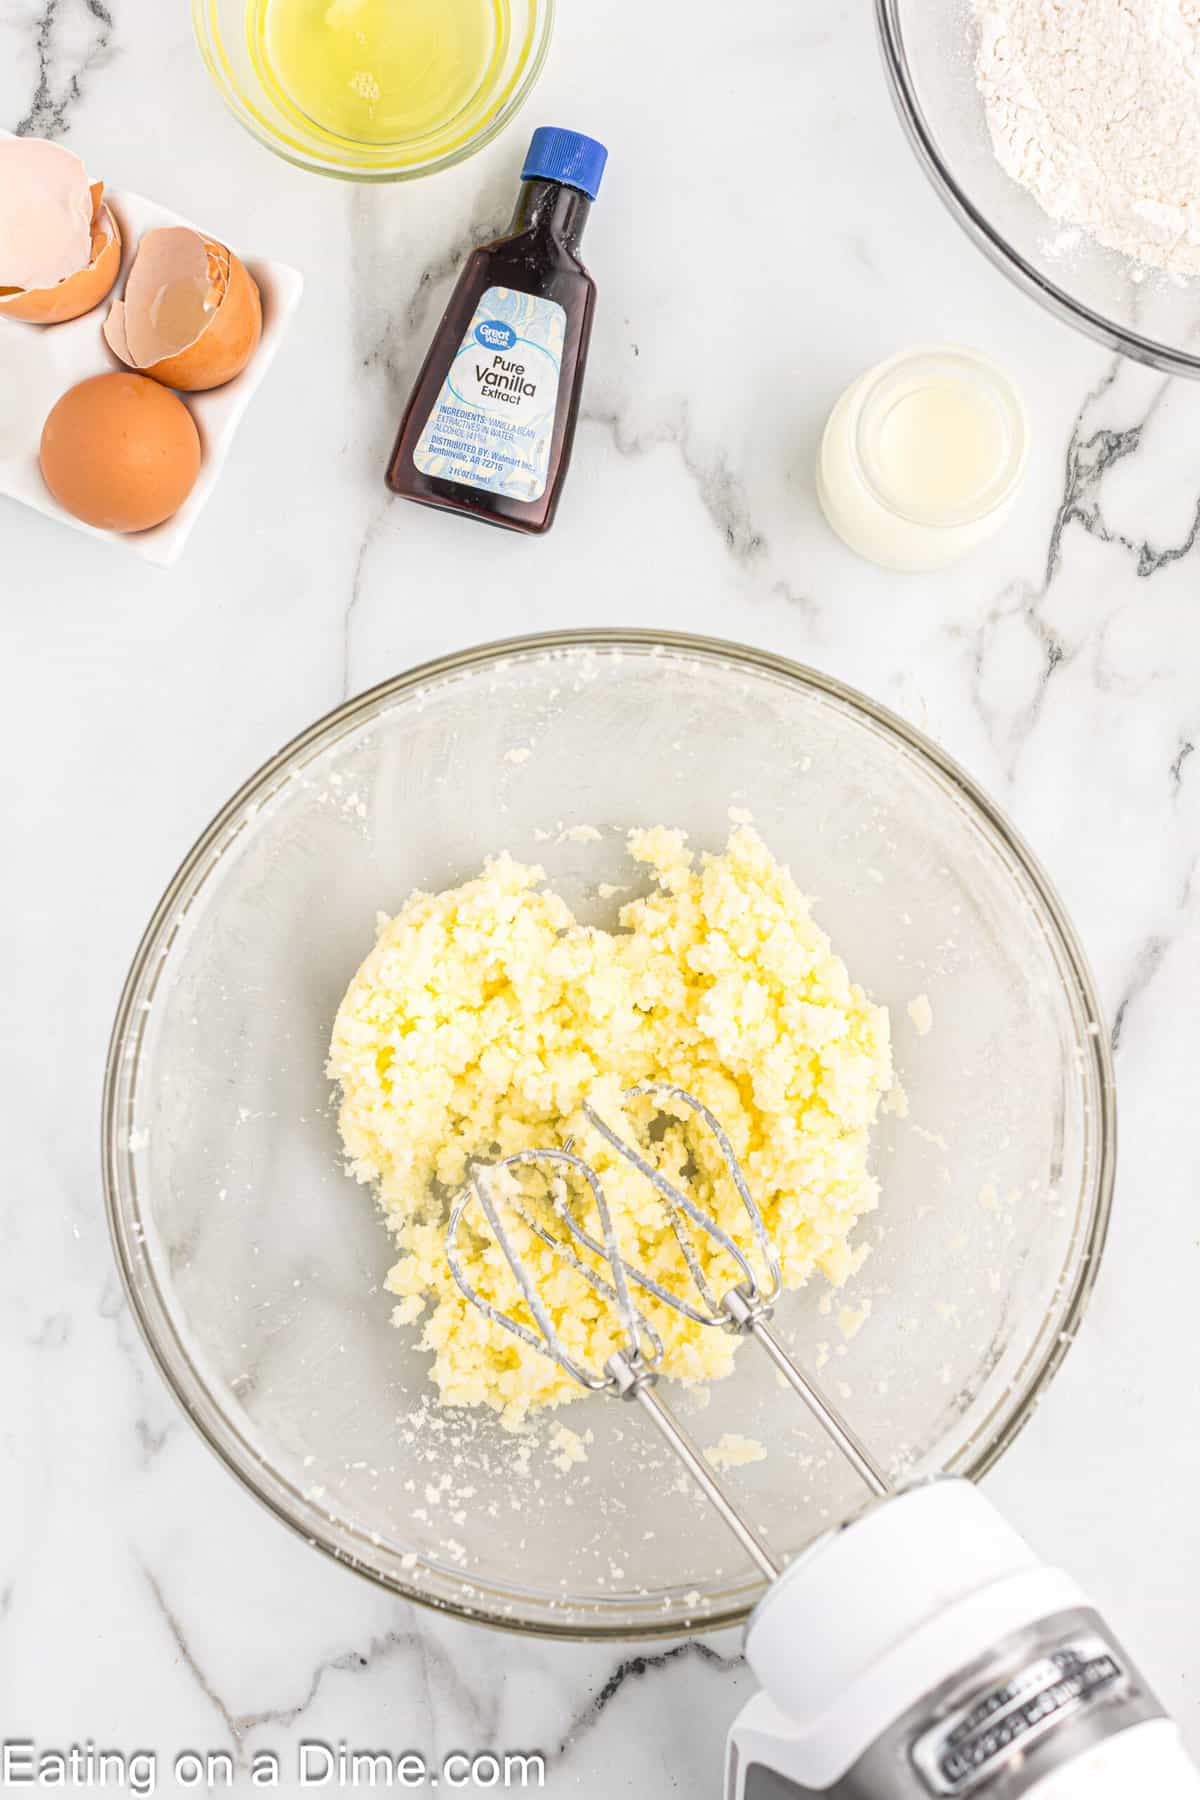 Beat together sugar, butter and eggs together in a bowl